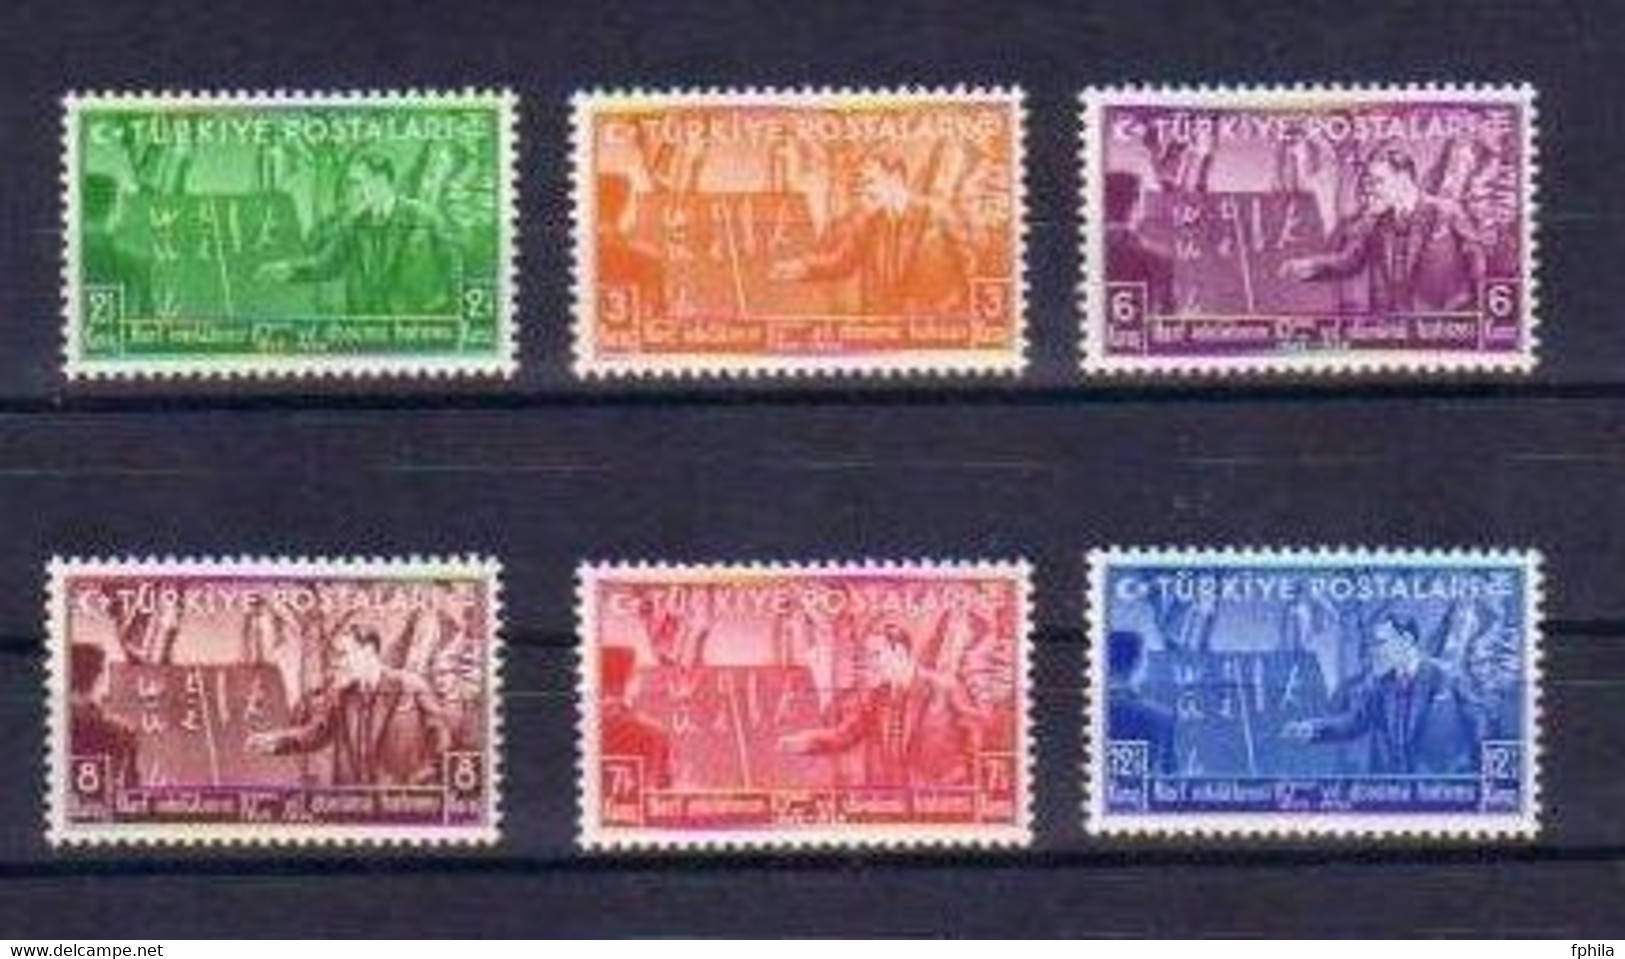 1938 TURKEY THE 10TH ANNIVERSARY OF THE REFORM OF THE TURKISH ALPHABET MNH ** - Neufs